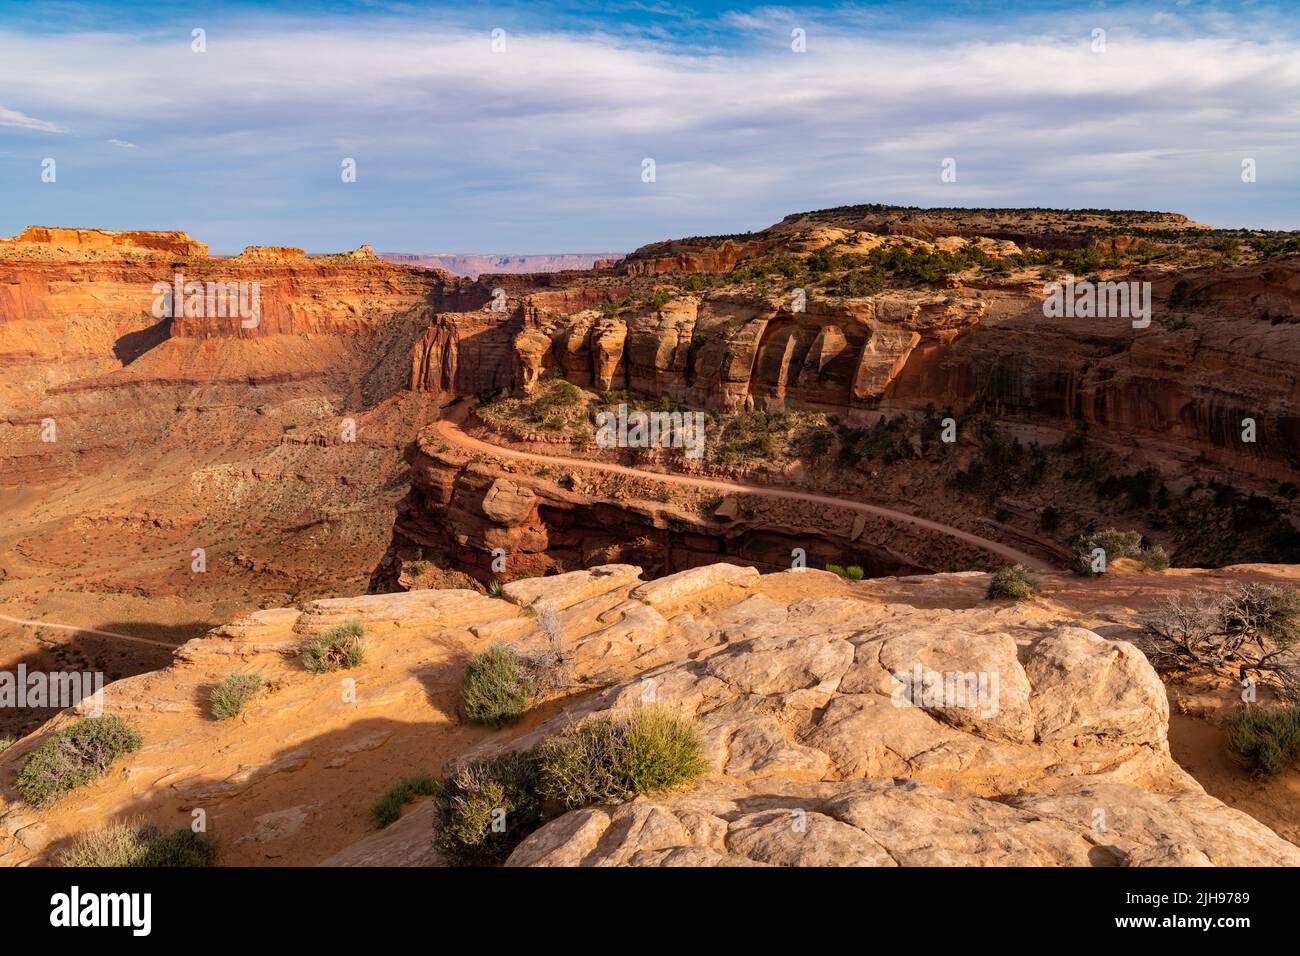 The 4WD Shafer Trail in curves high above Shafer Canyon through a rugged desert landscape in Canyonlands National Park, Utah Stock Photo